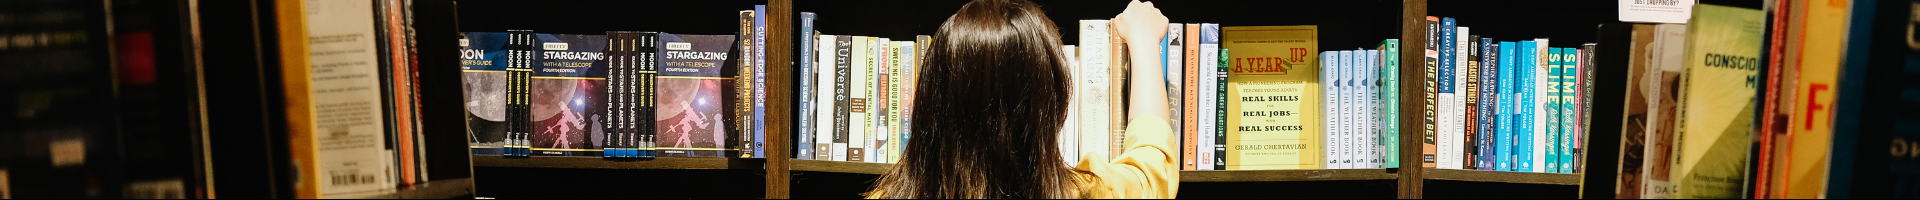 photo of a person reaching for a book on a shelf